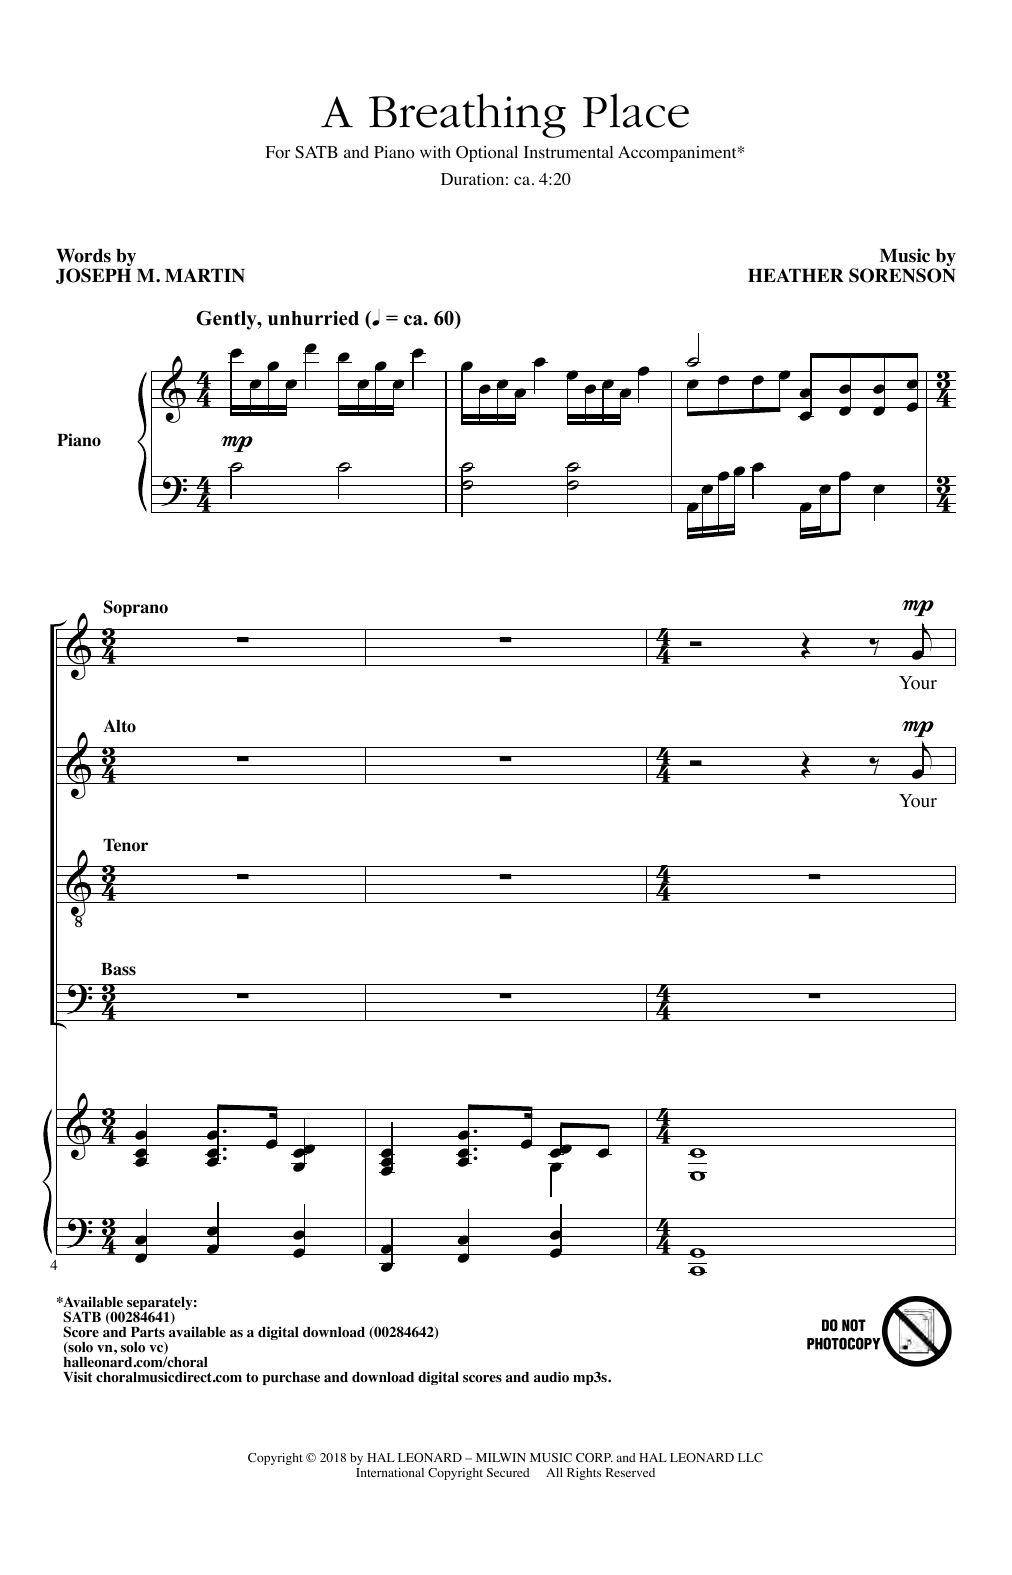 Download Heather Sorenson A Breathing Place Sheet Music